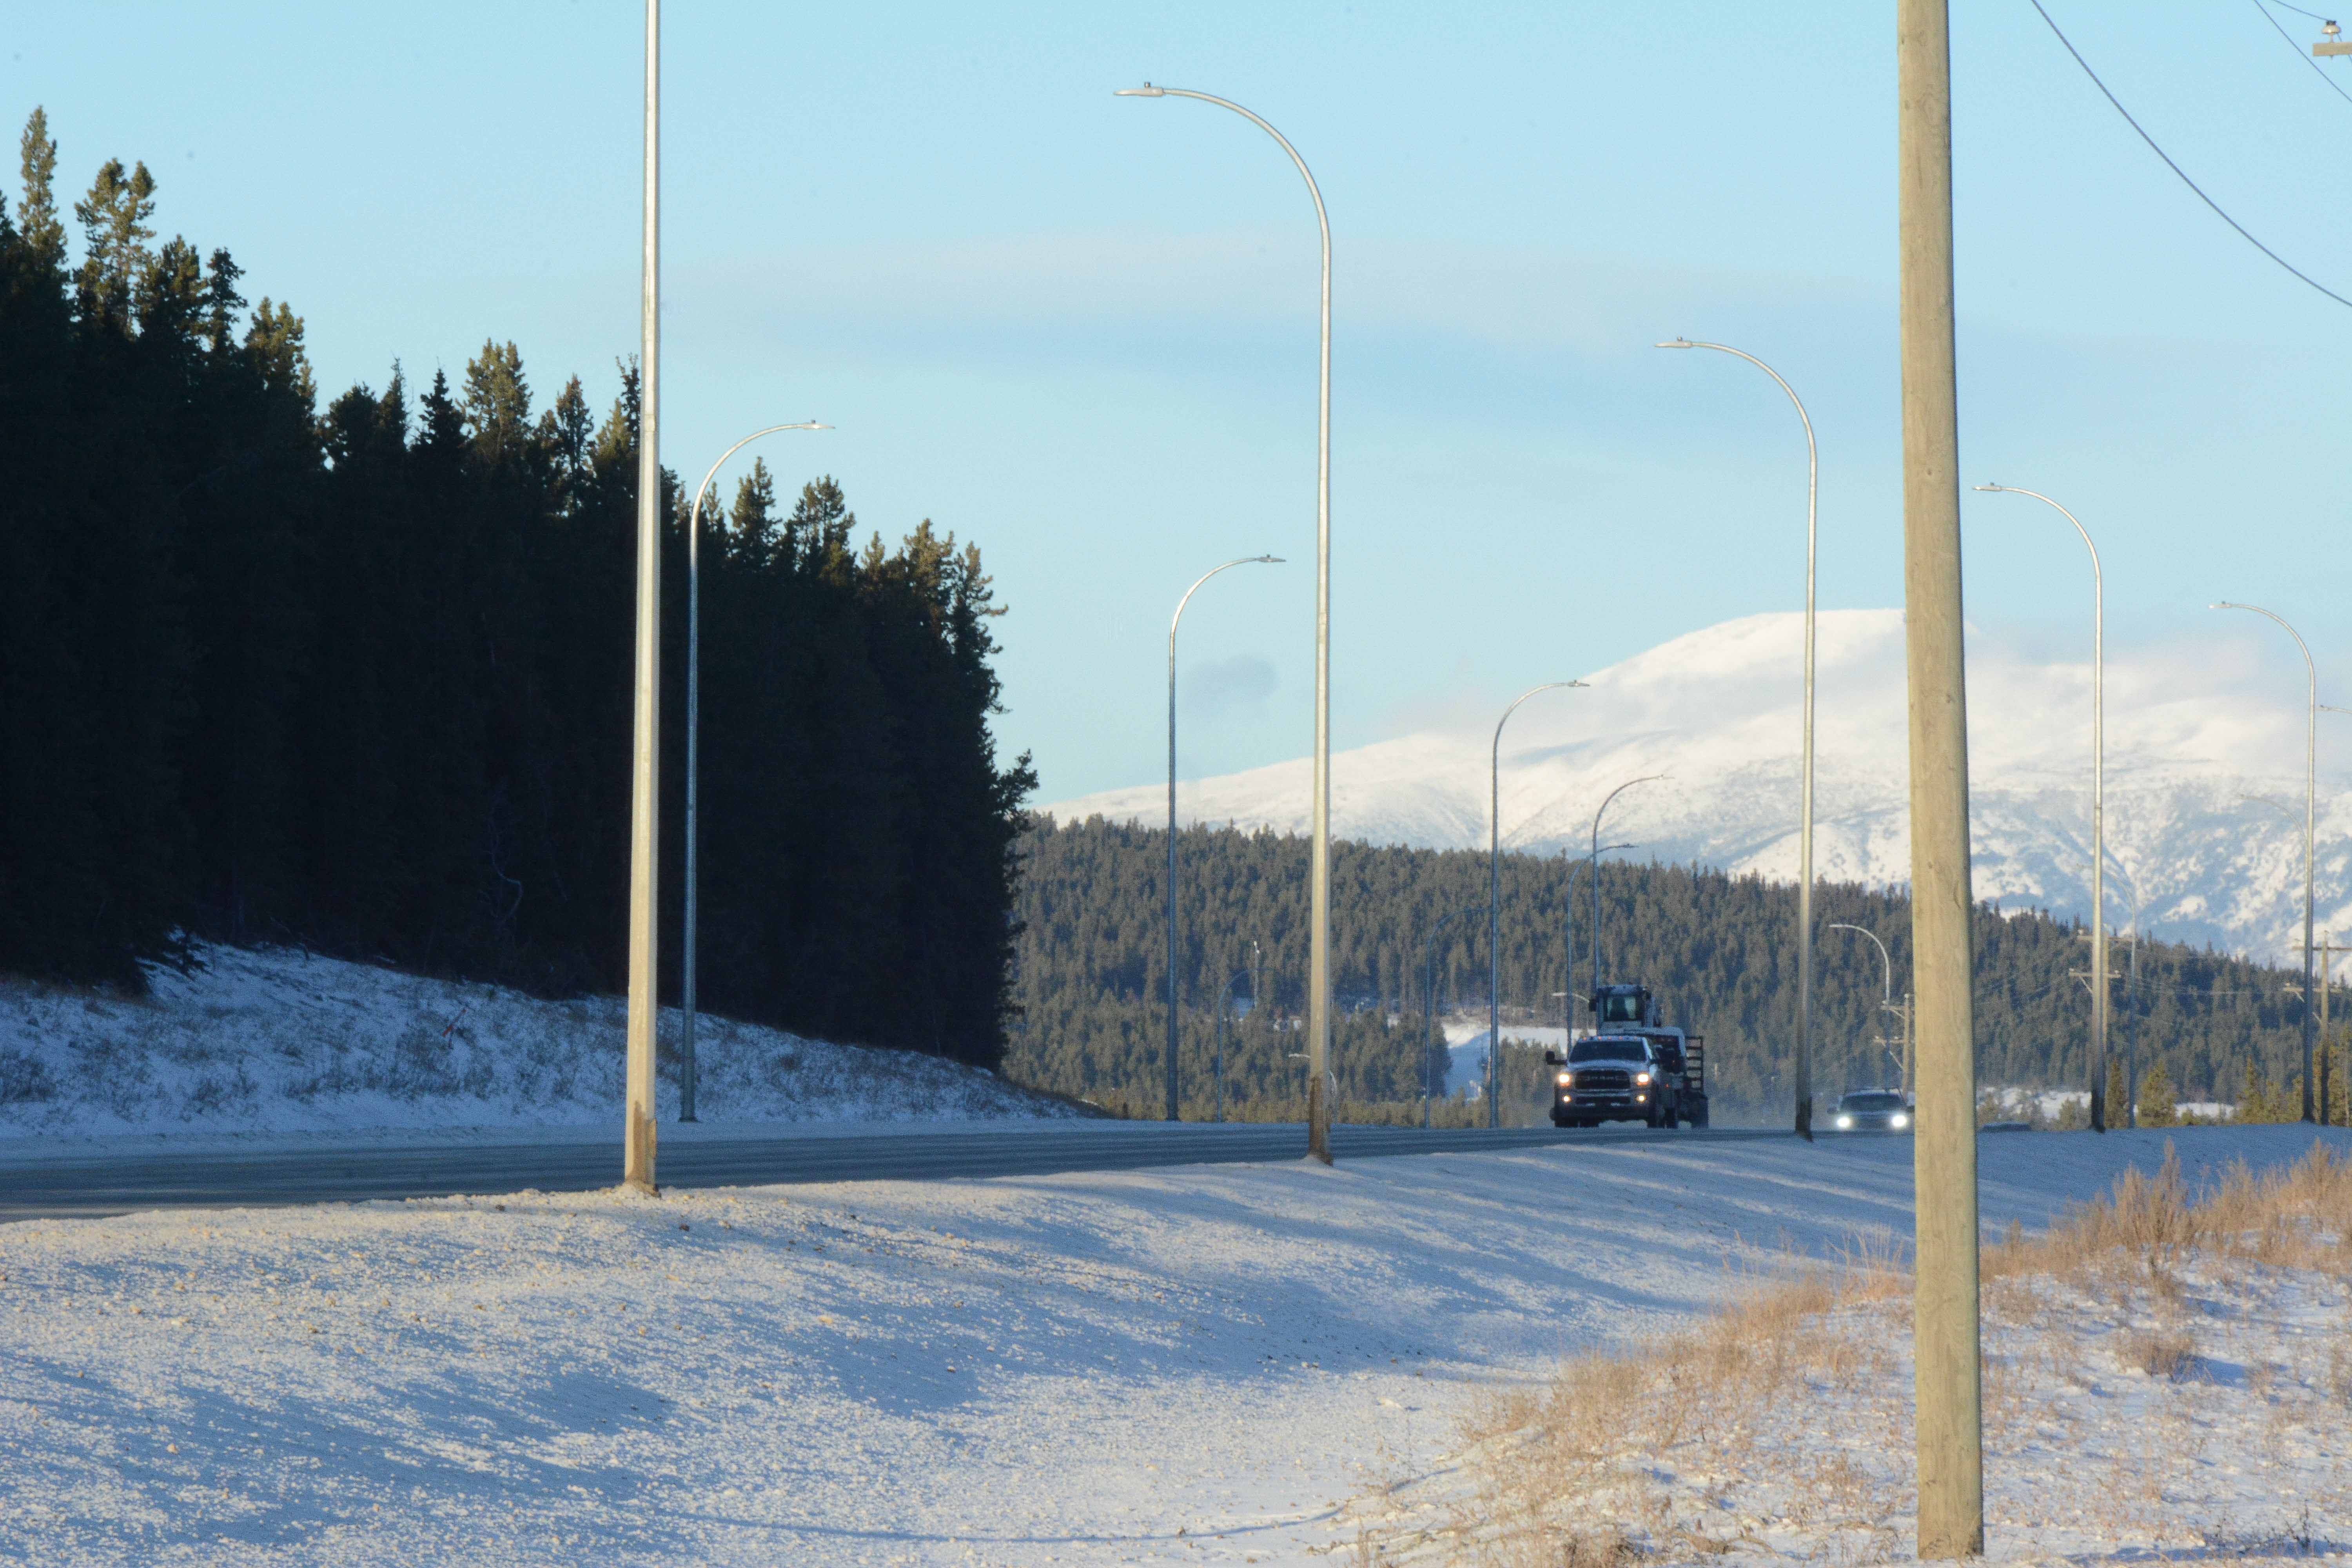 View of vehicles driving on the Alaska Highway from an active transportation path.